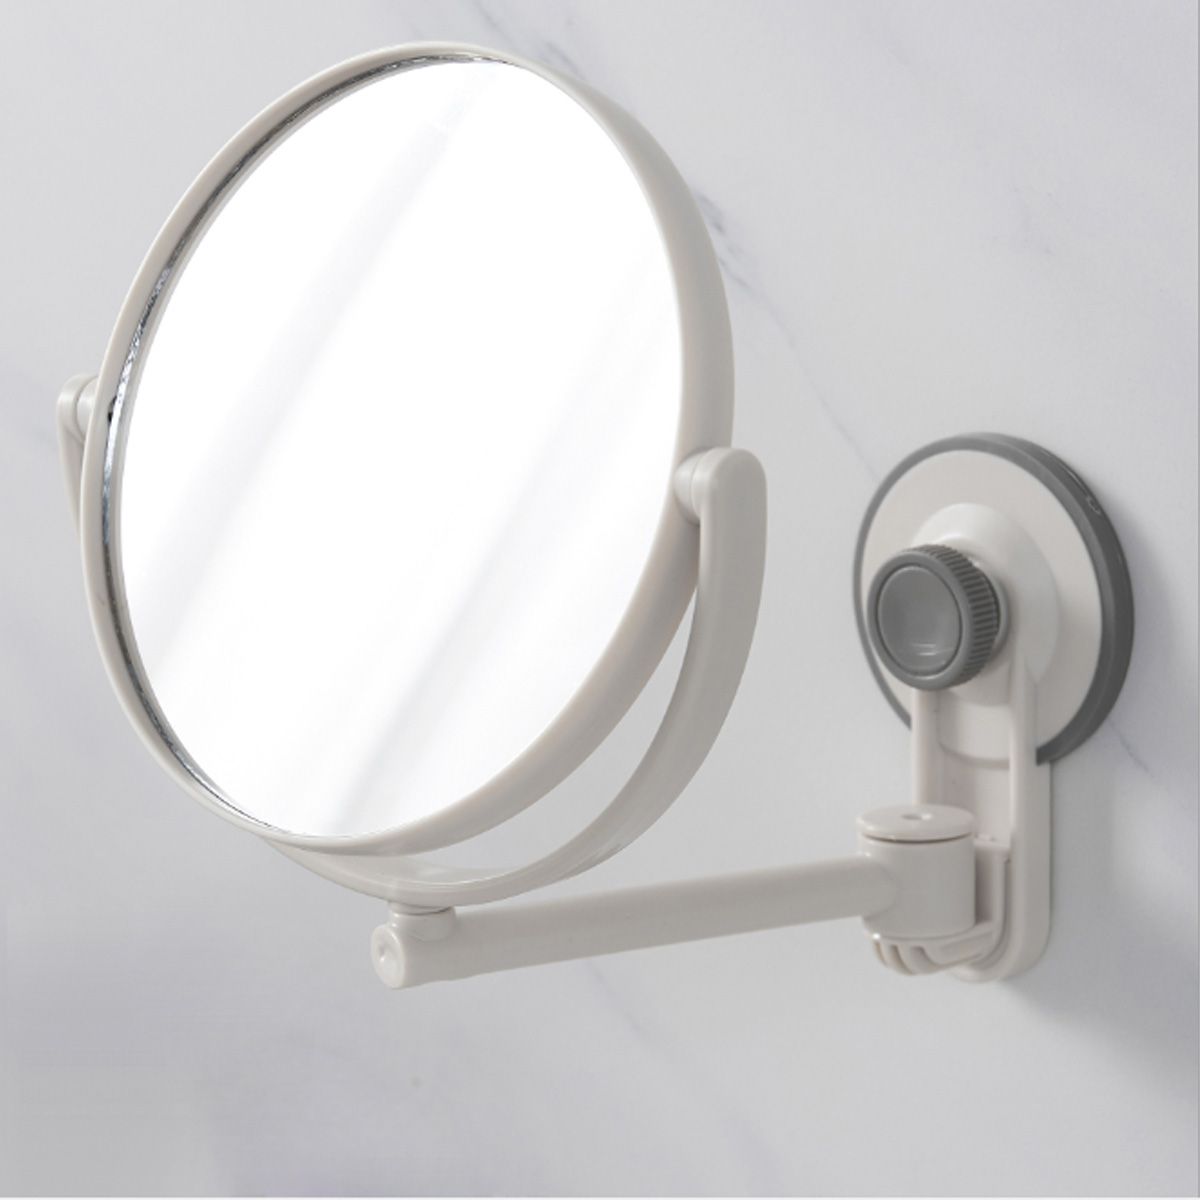 360deg-Suction-Cup-No-Fog-Free-Shaving-Shave-Bathroom-Makeup-Double-sided-Mirrors-1537560